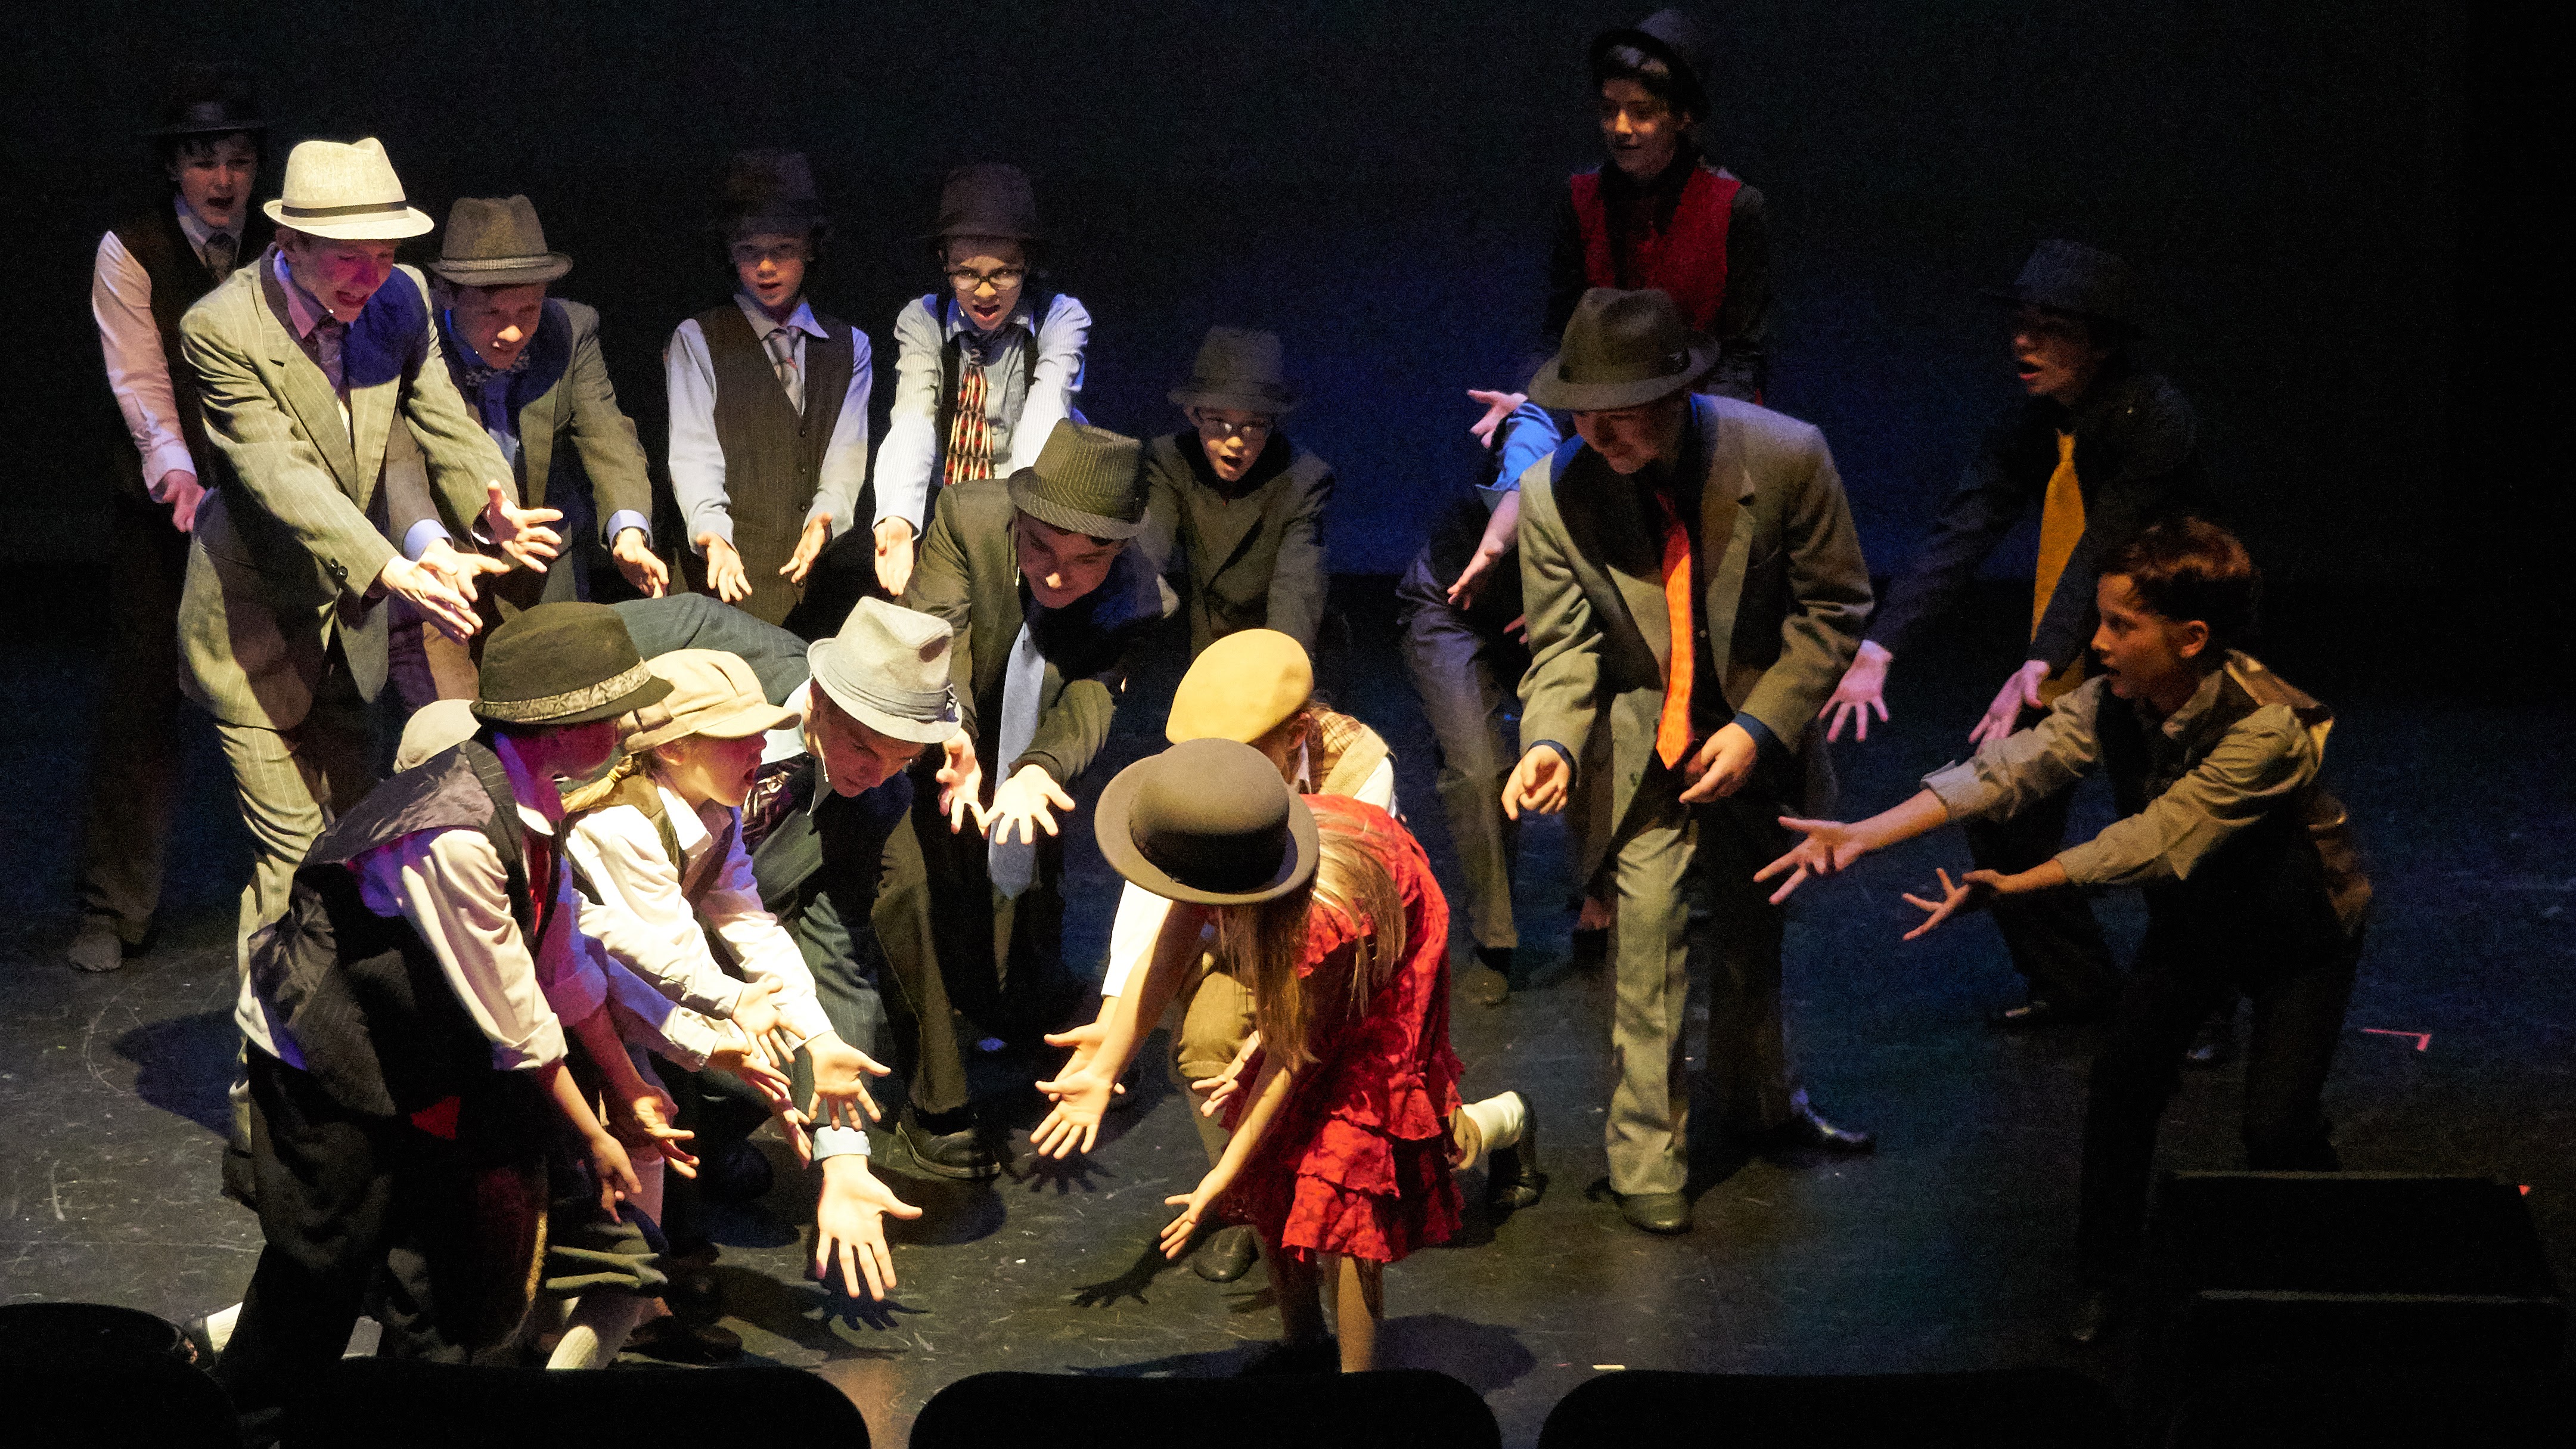 Youthful actors take on one of the most popular musicals ever, as the Rose Childrens Theatre does “Guys and Dolls”